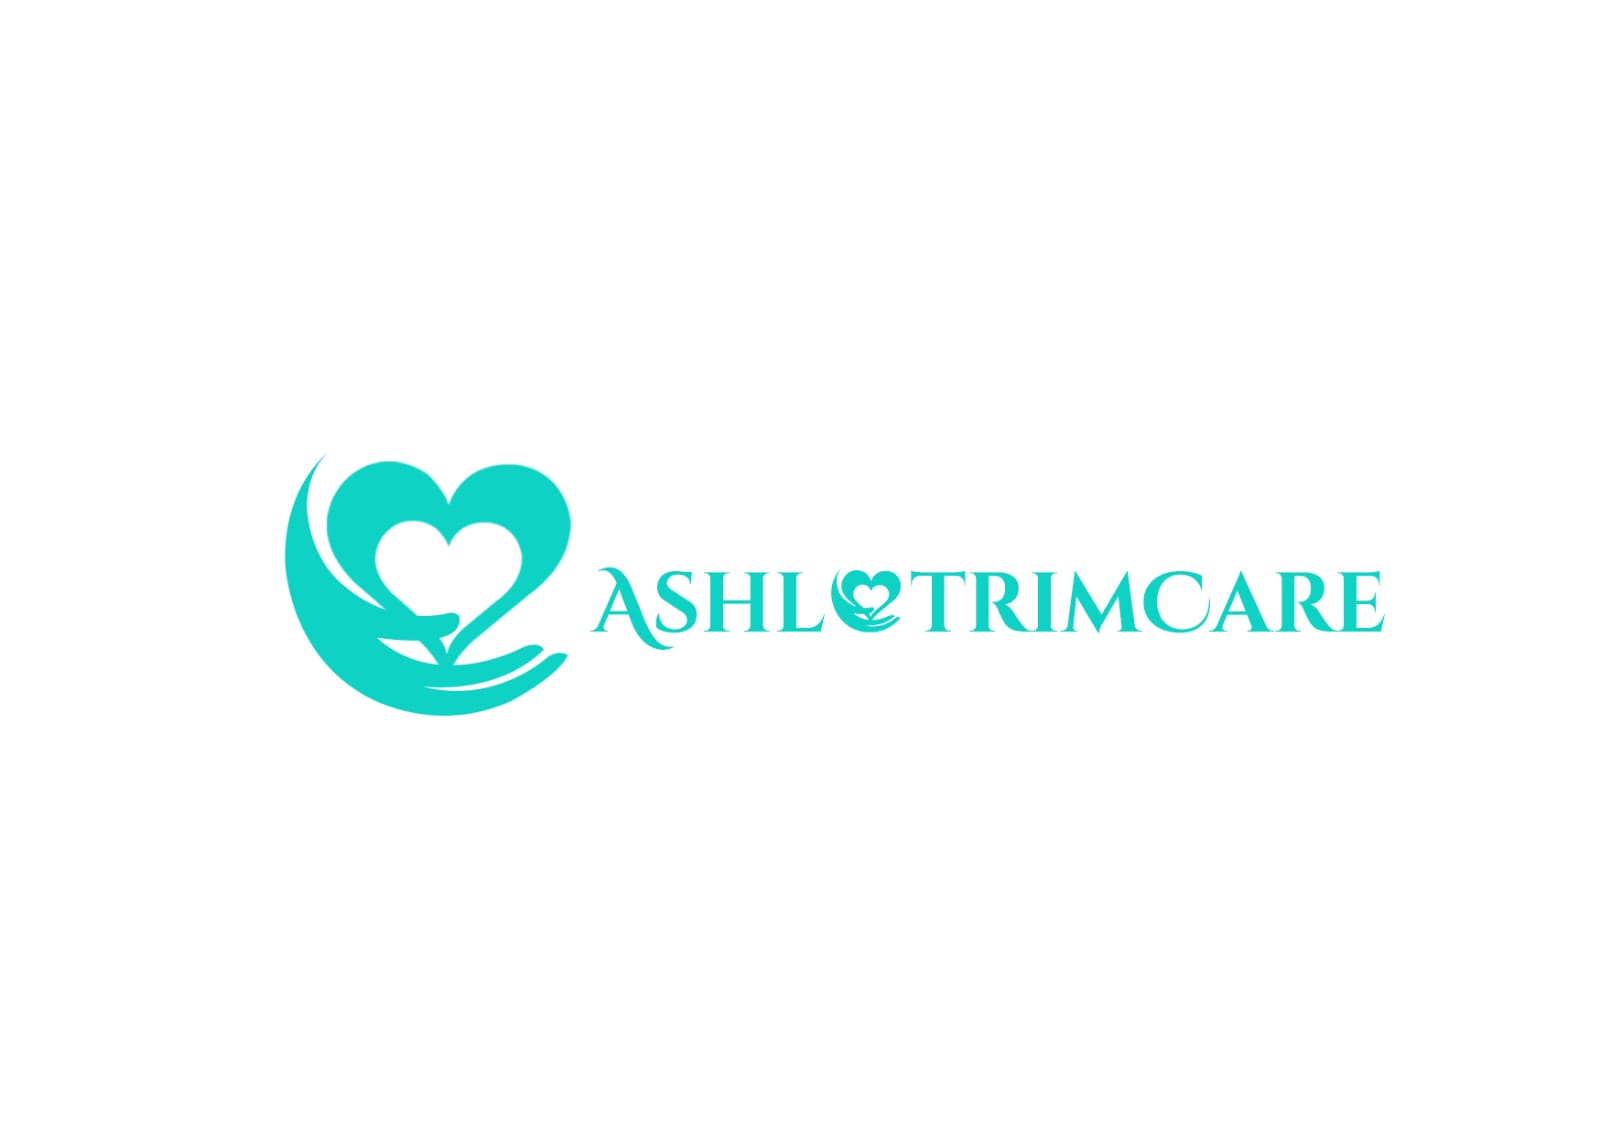 Company logo, showing delivery of quality and safe care while exhibiting compassion